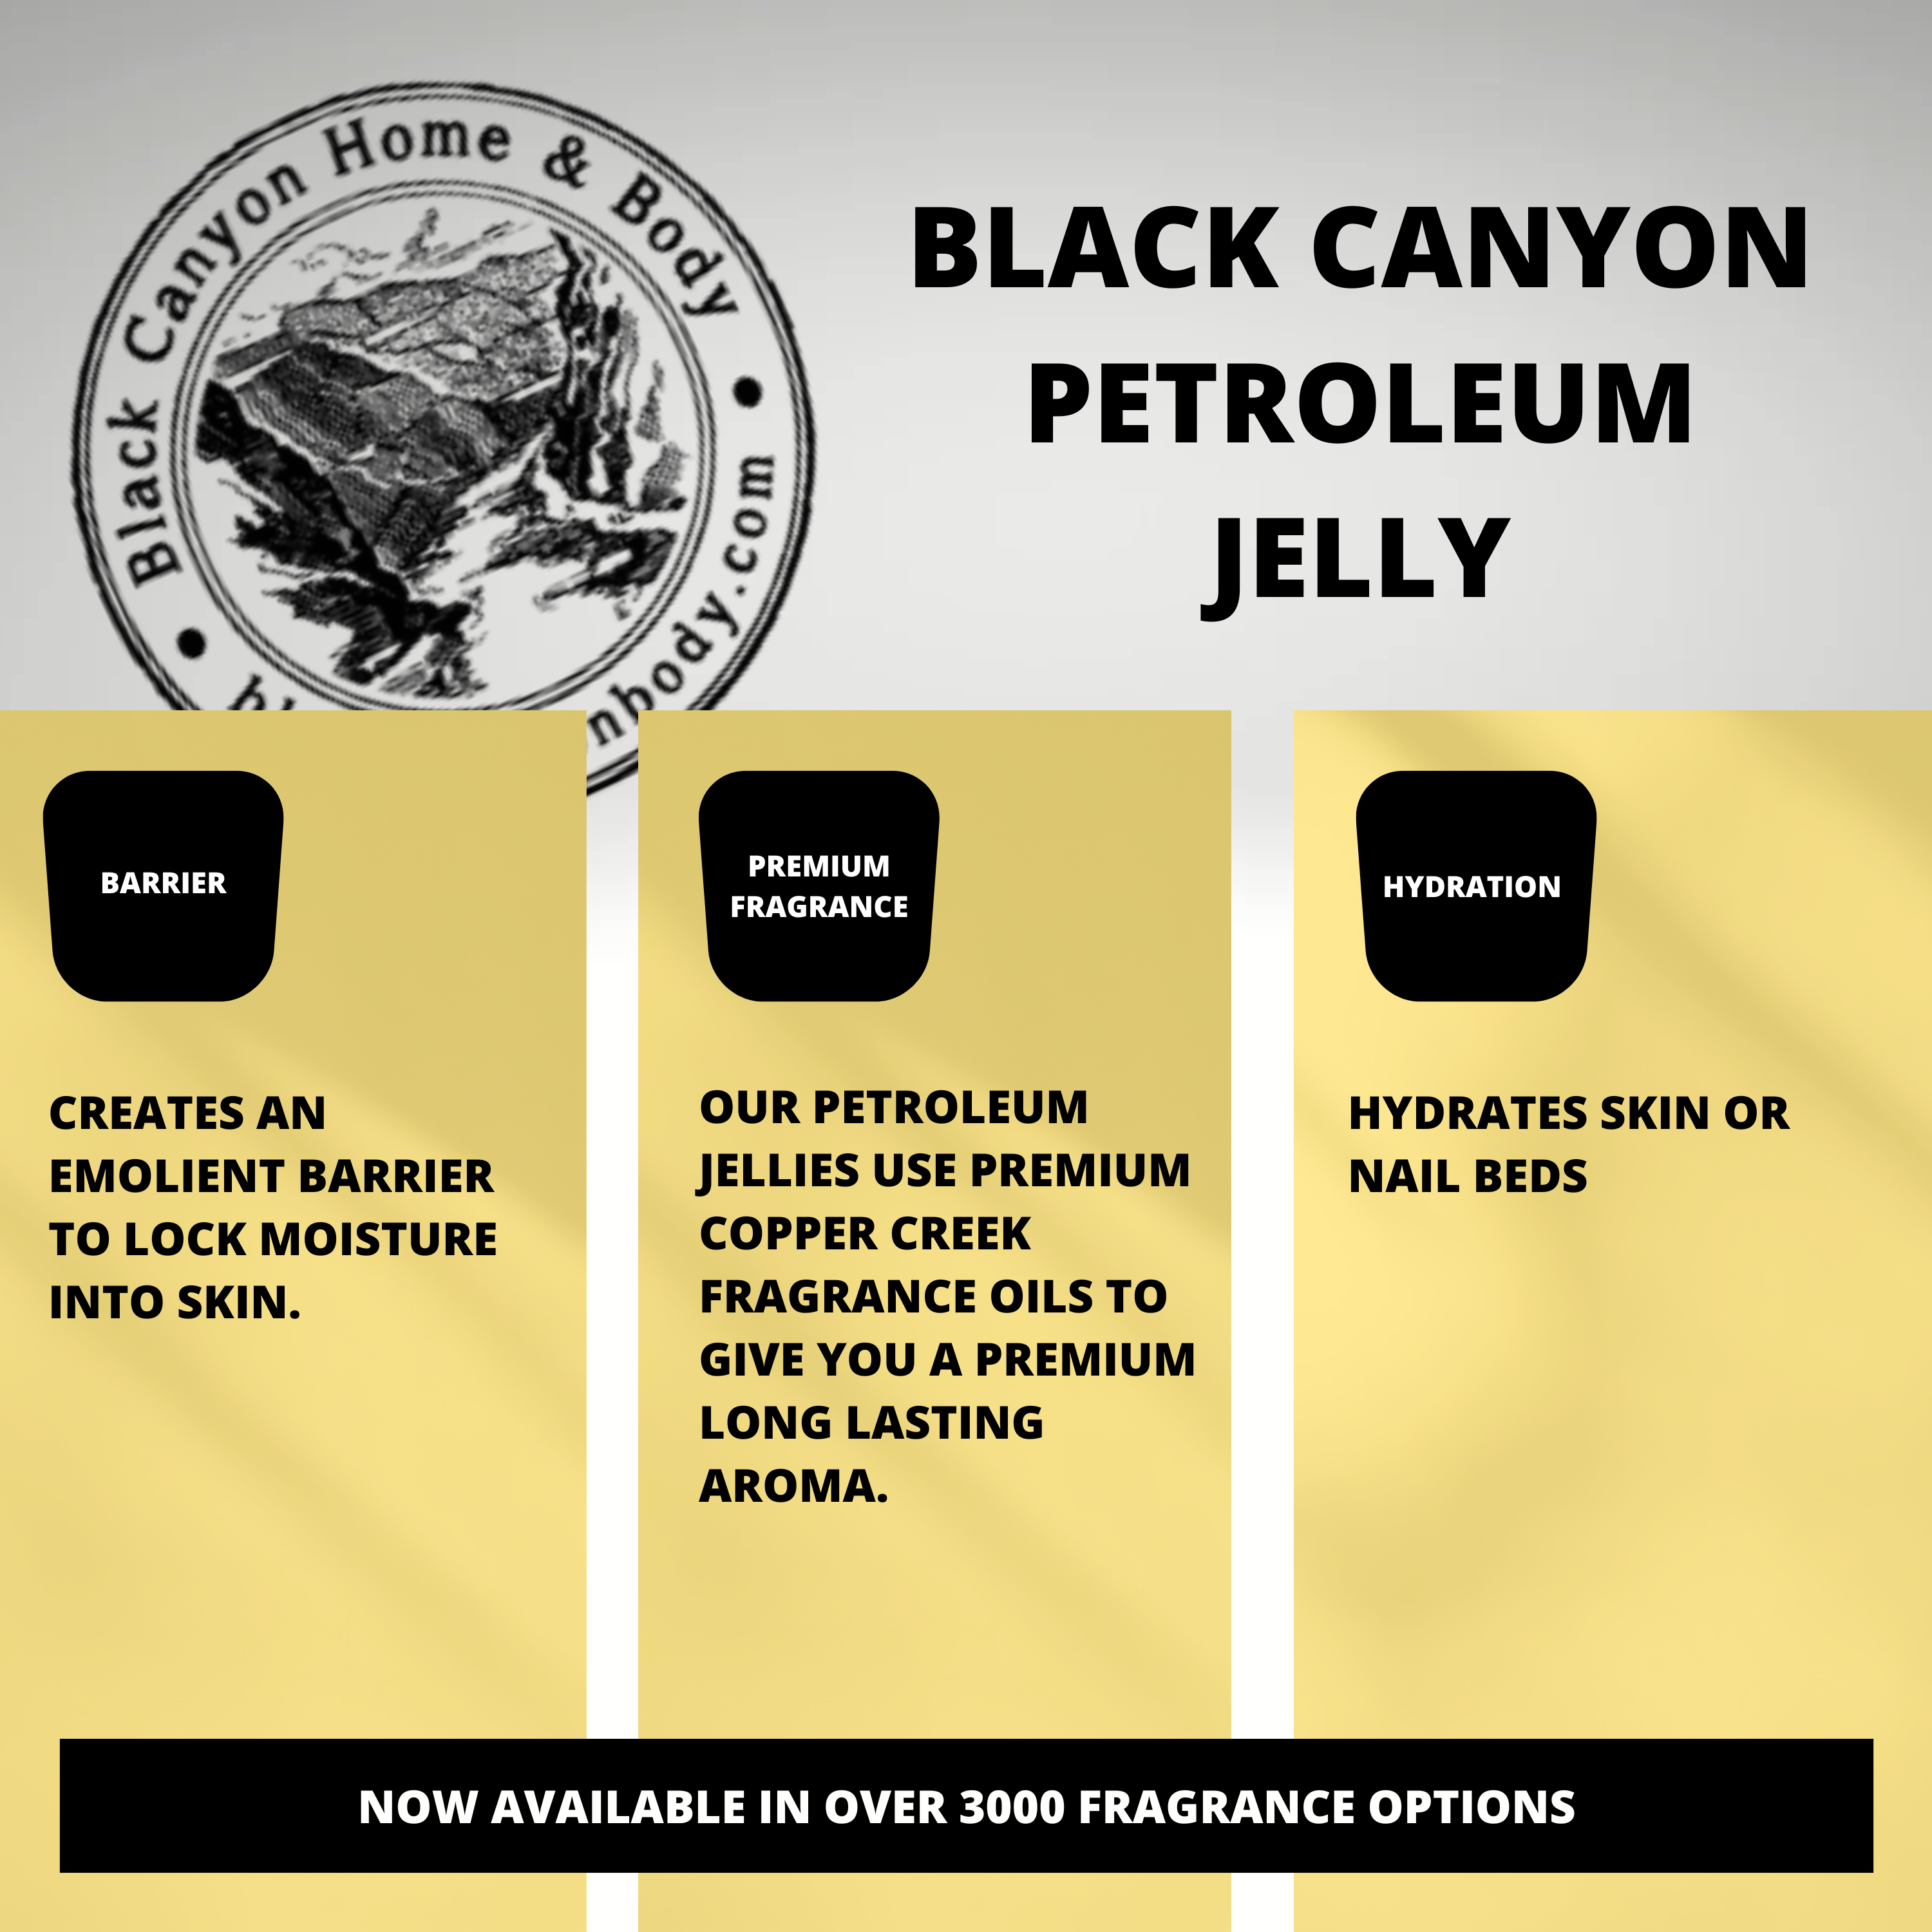 Black Canyon Simply Sinful Scented Petroleum Jelly